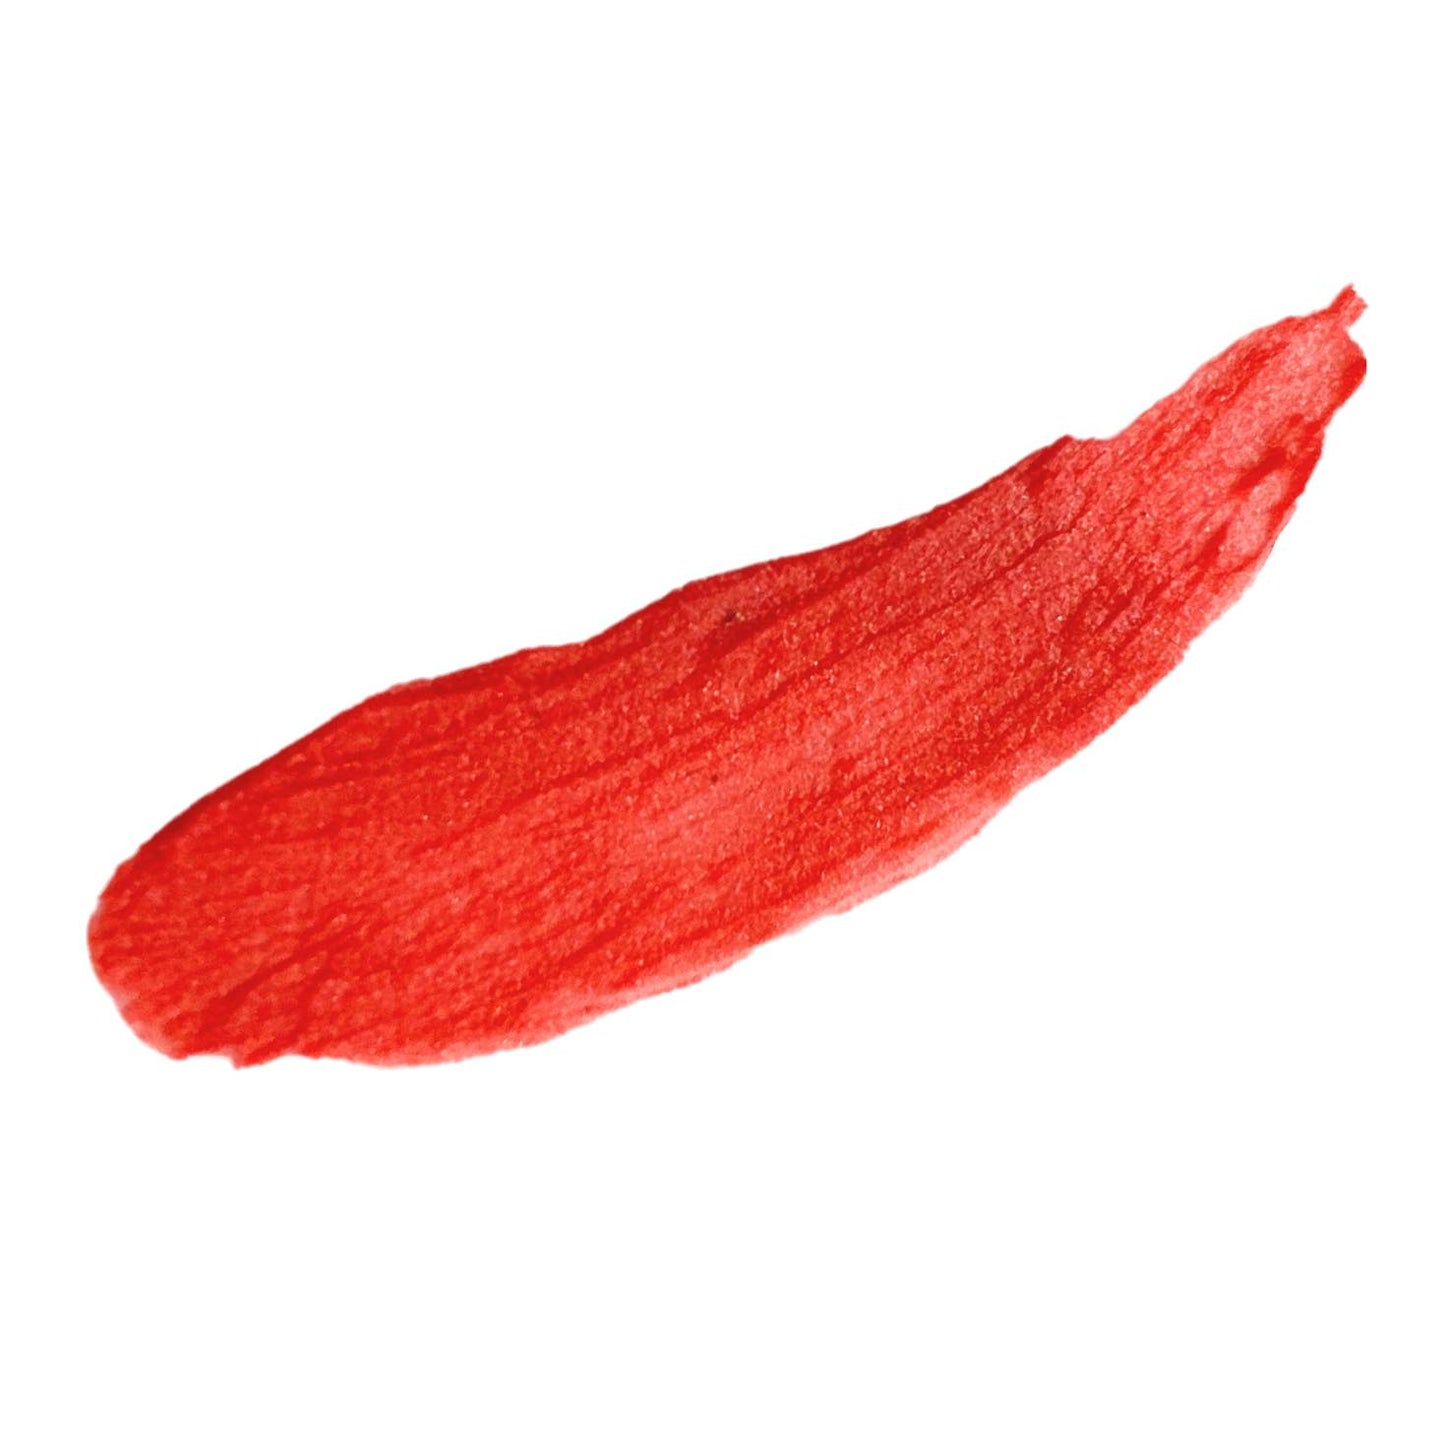 soft coral with an orange undertone tinted lip balm smear on white background